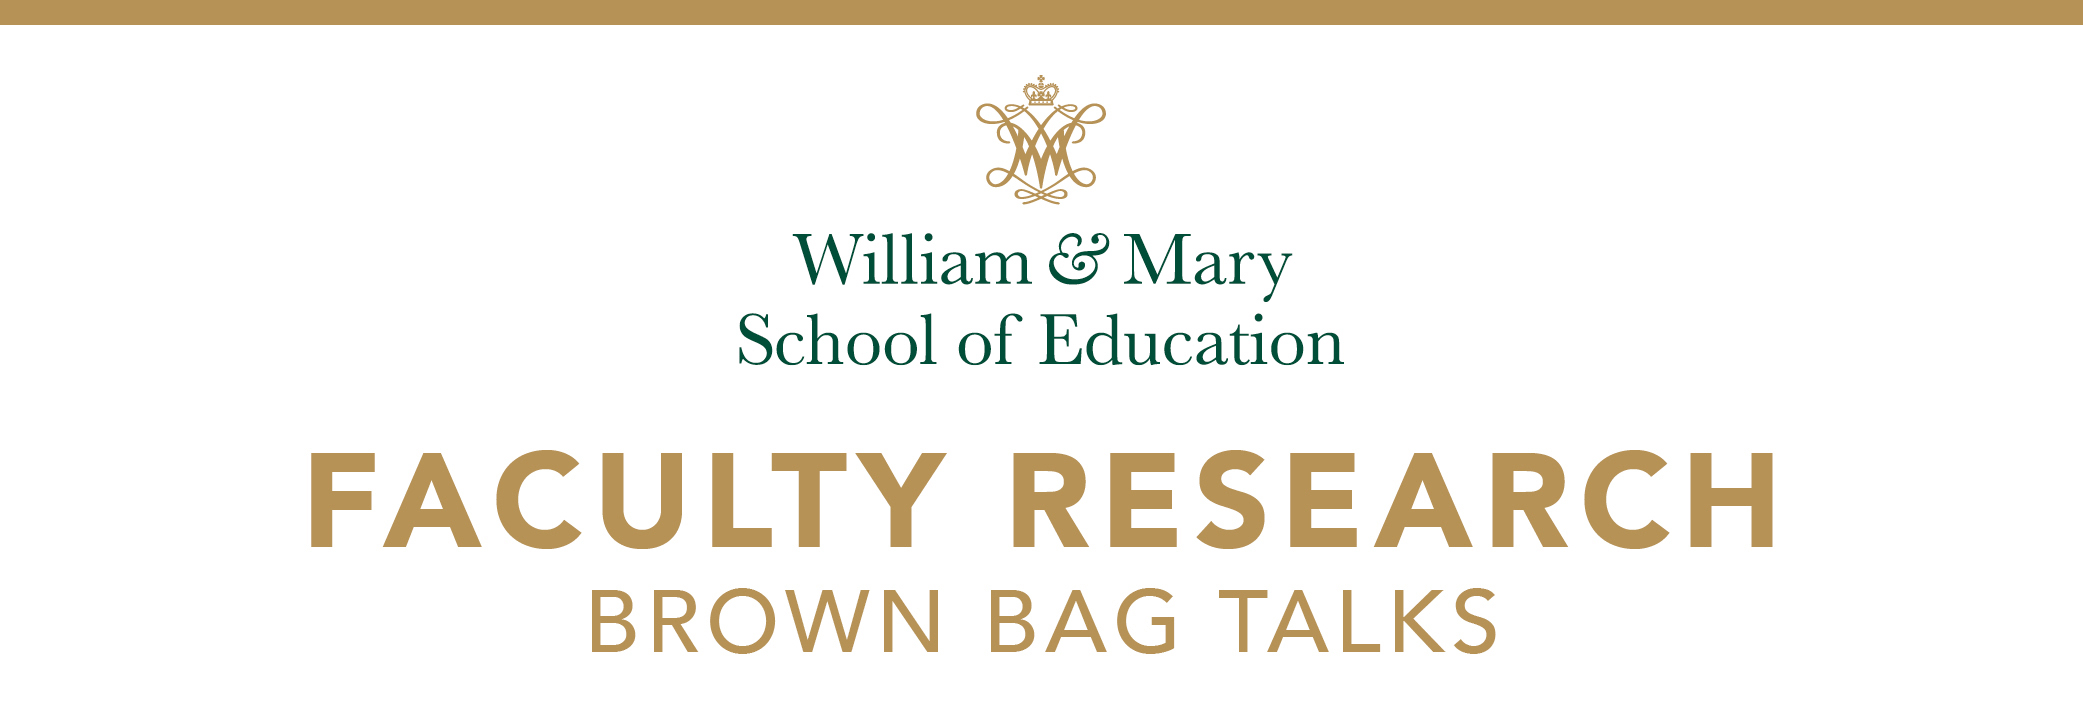 Faculty Research Brown Bag Talks